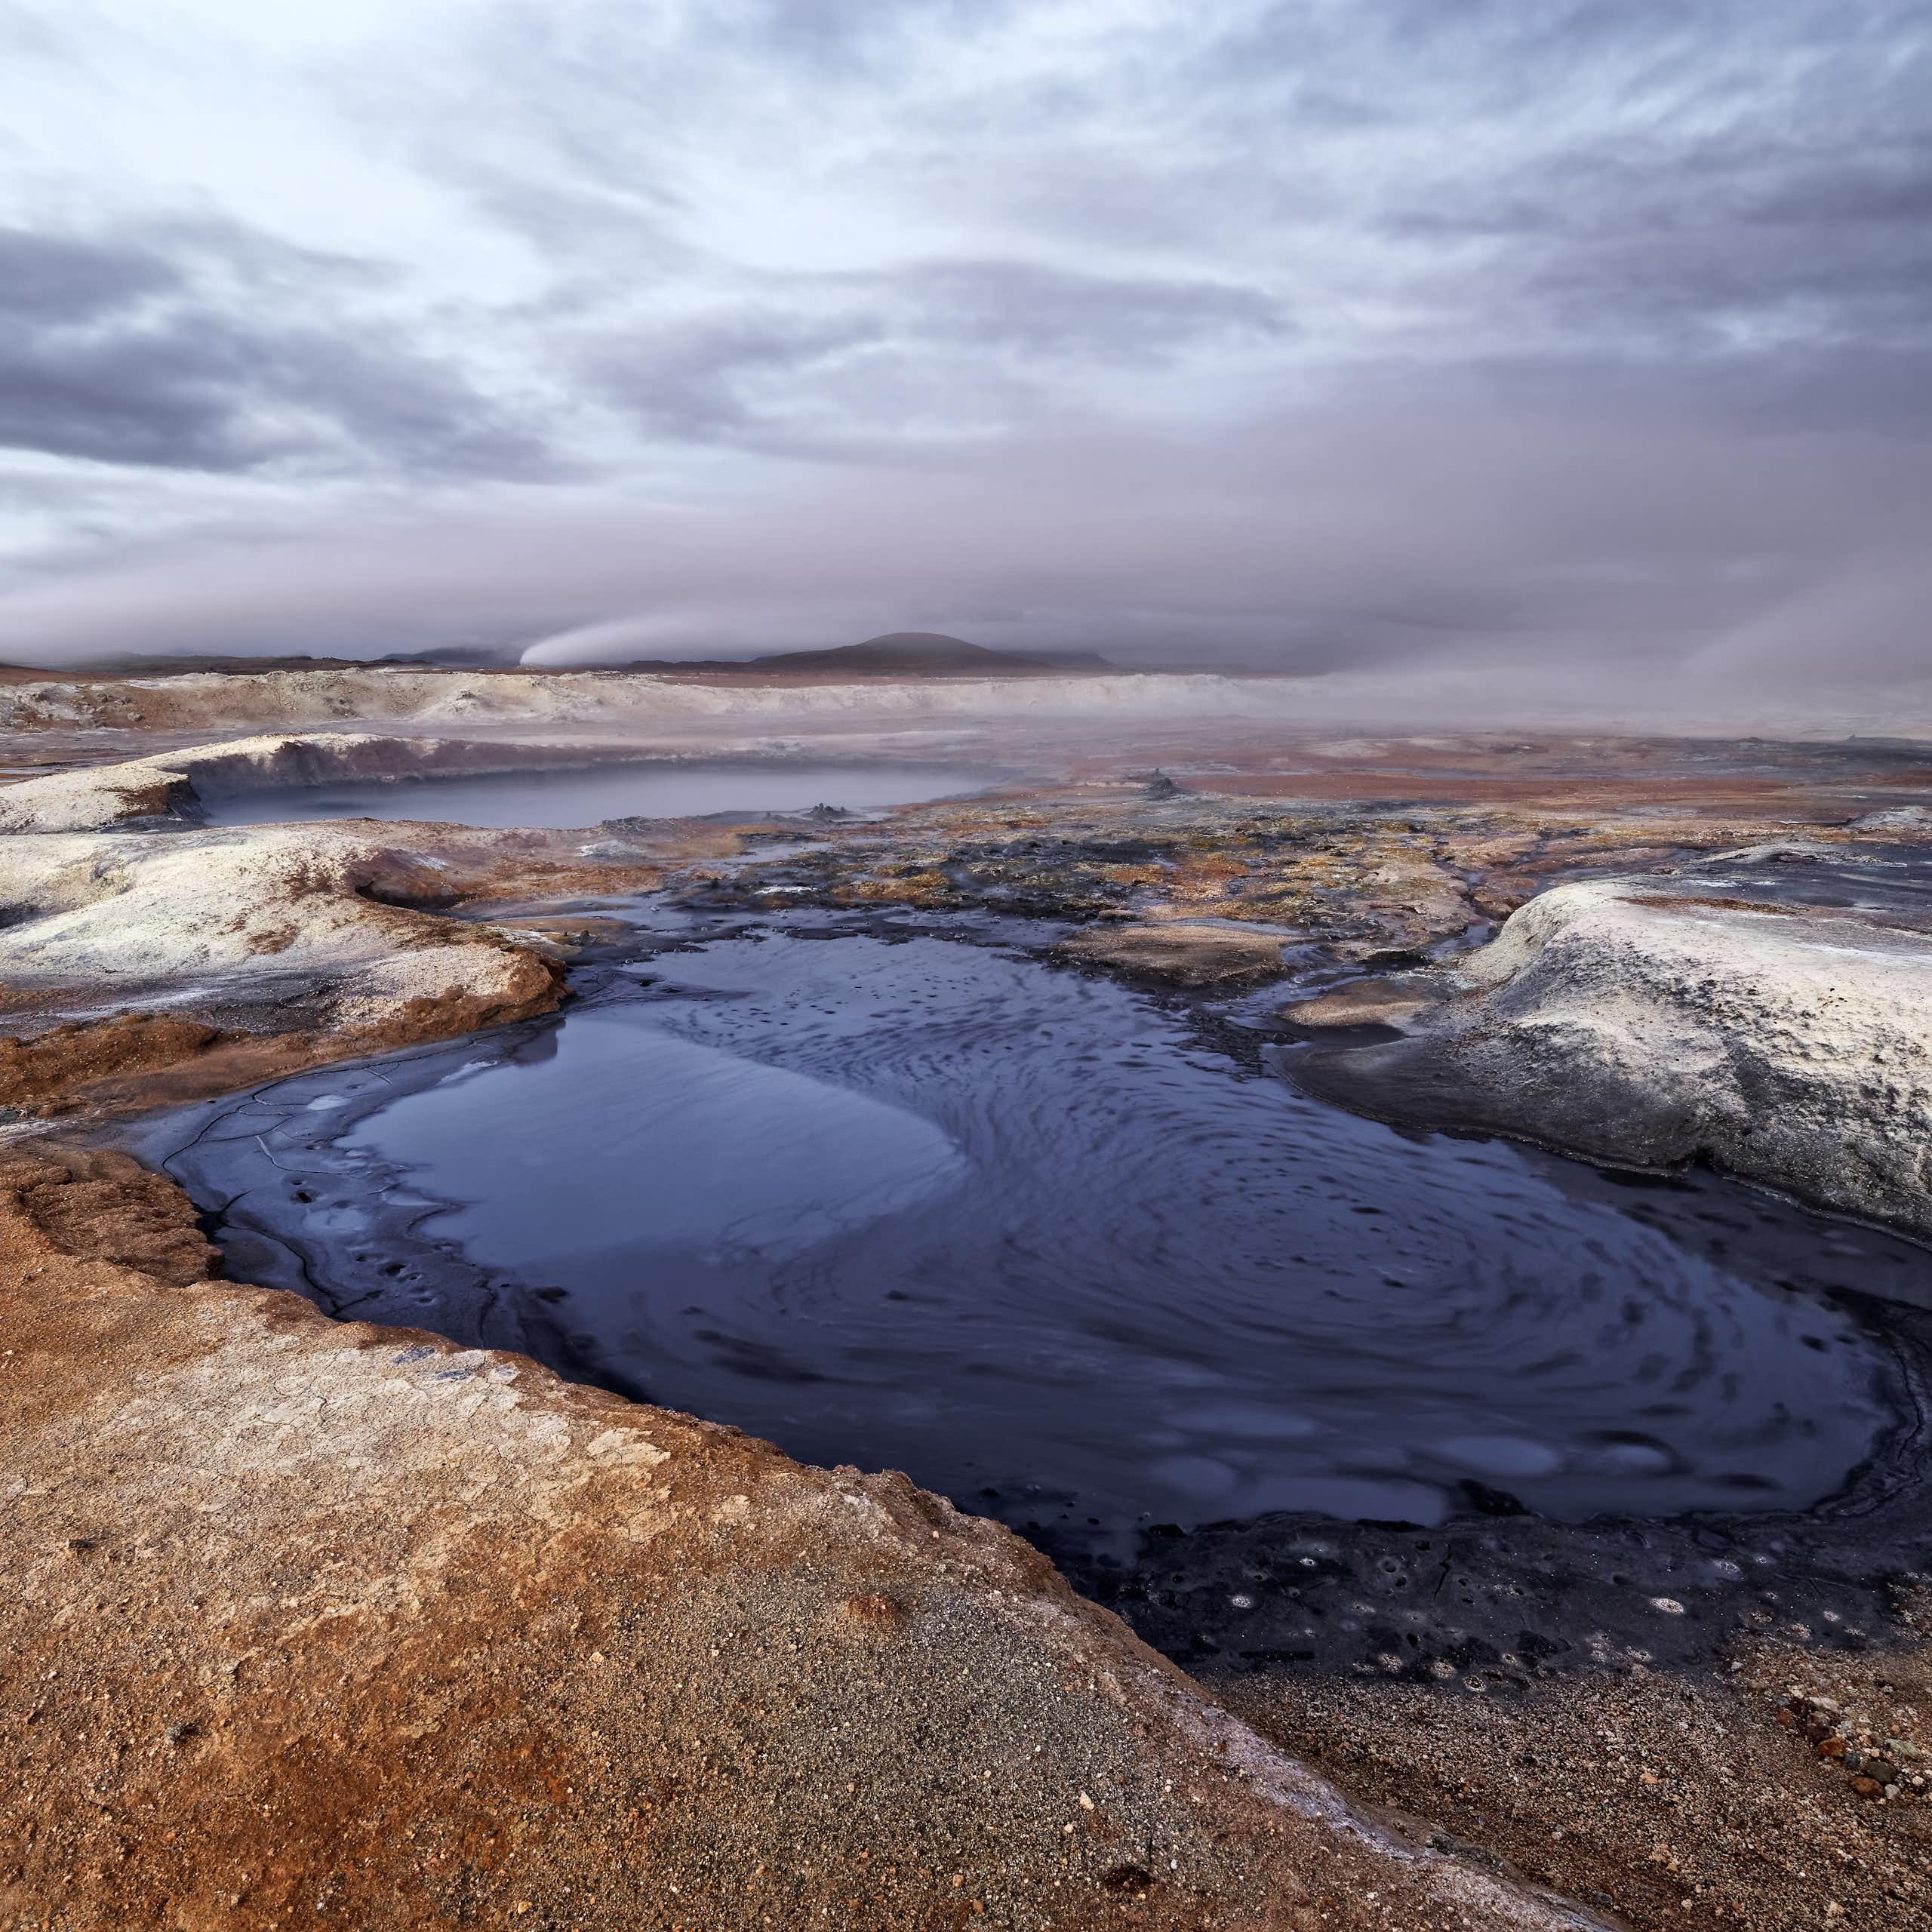 A barren volcanic landscape with a small pool of dark blue water at the forefront.